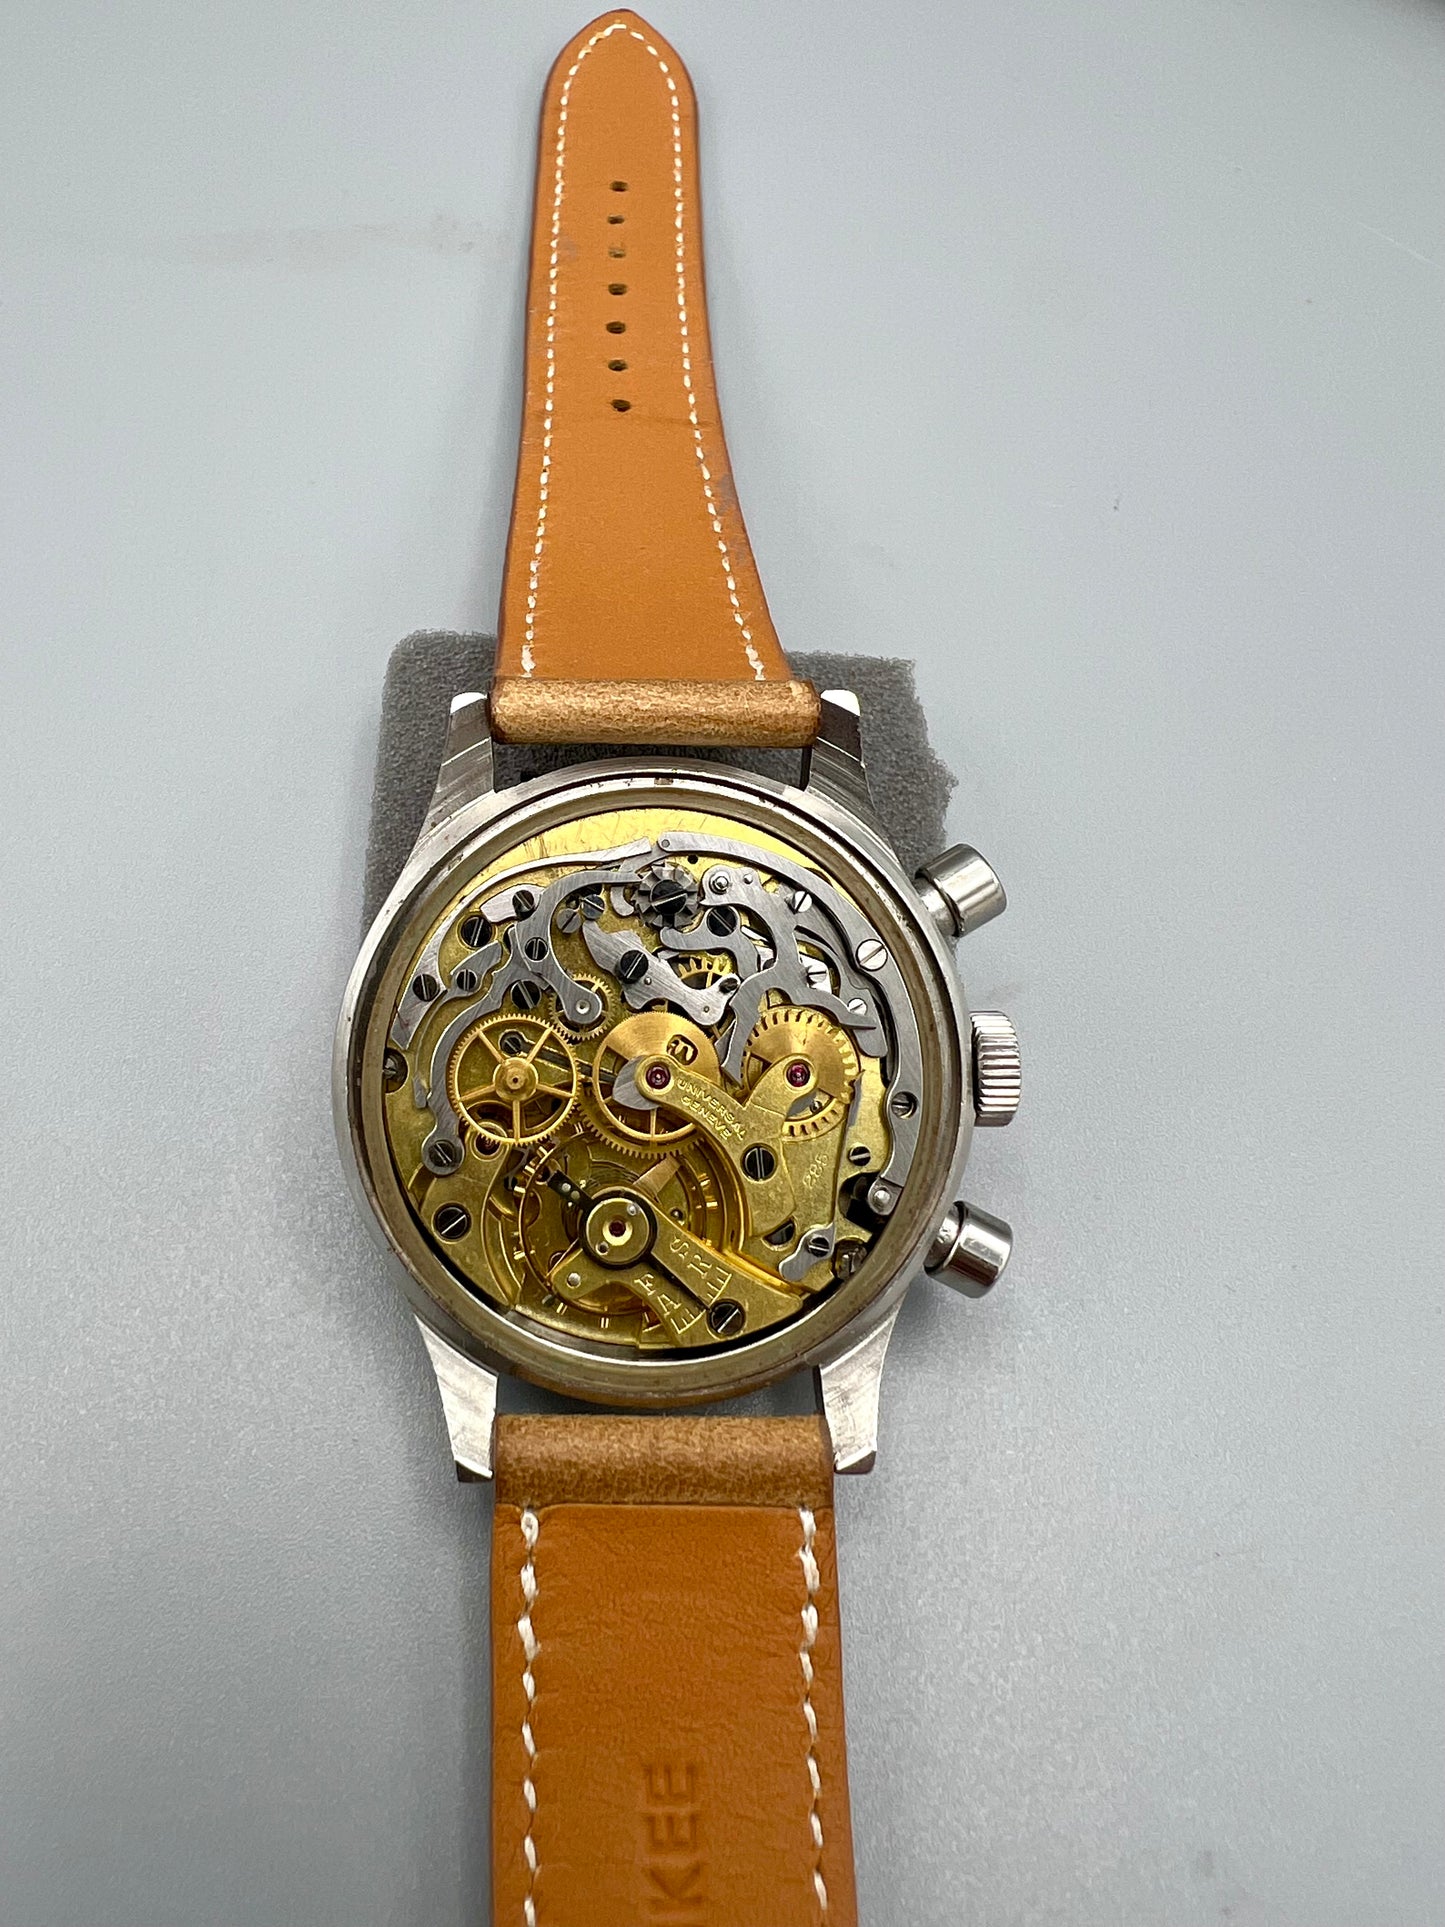 Universal Genève, Ref 22410, Large Stainless Steel Chronograph, 1940